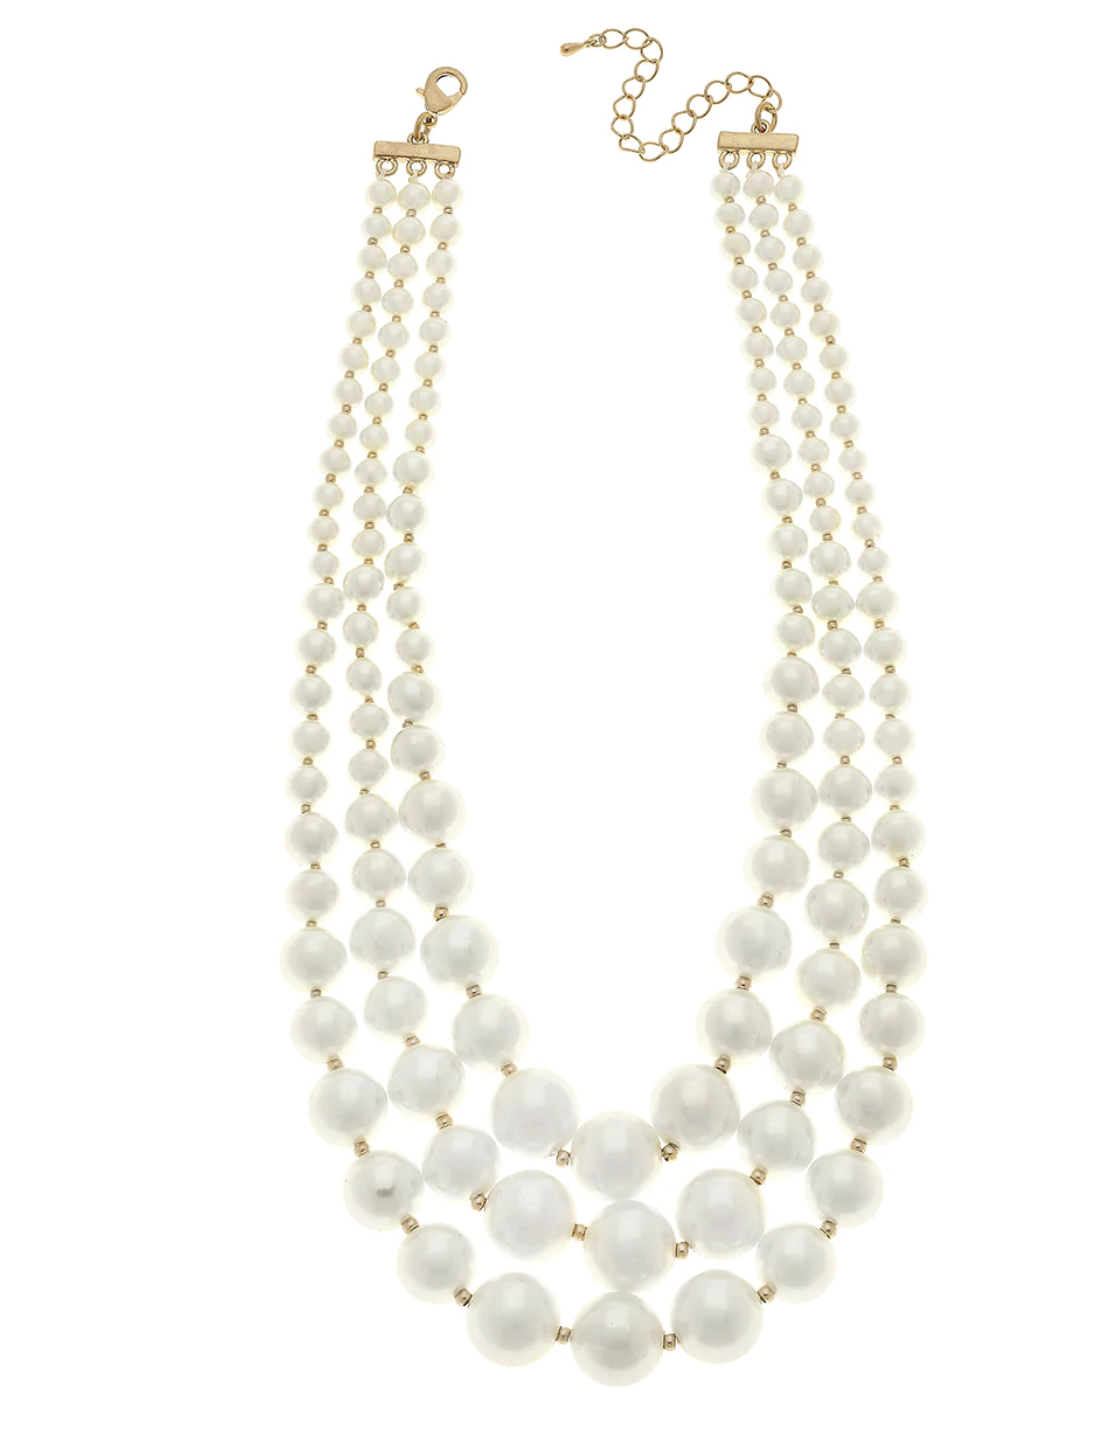 AUDREY LAYERED STATEMENT NECKLACE IN IVORY PEARL